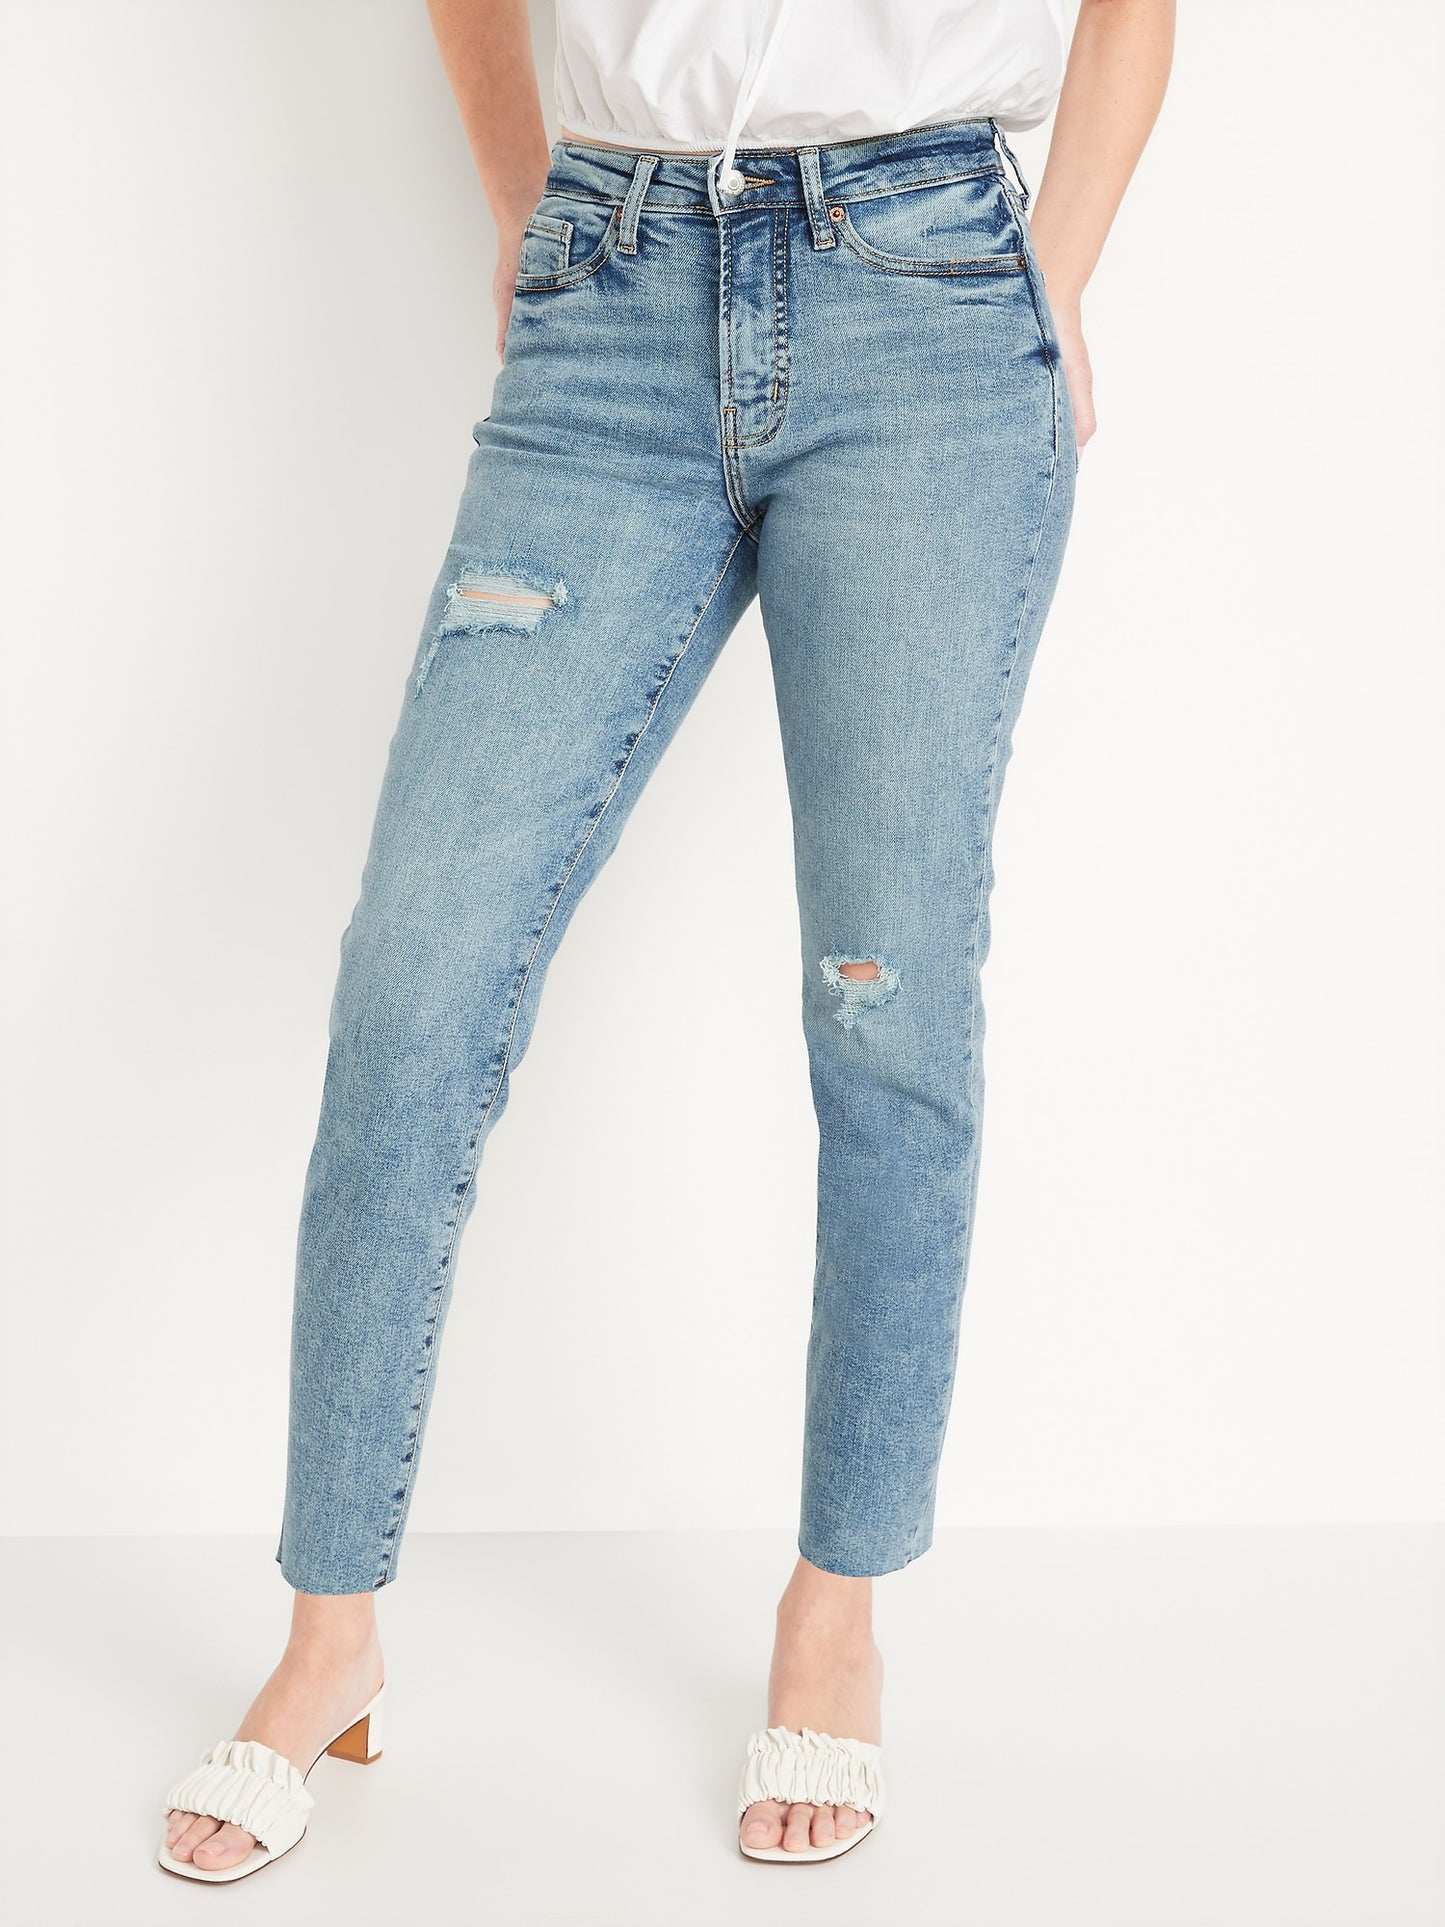 High-Waisted O.G. Straight Ripped Cut-Off Ankle Jeans for Women Og Straight Stretch Medium Destroy Cora